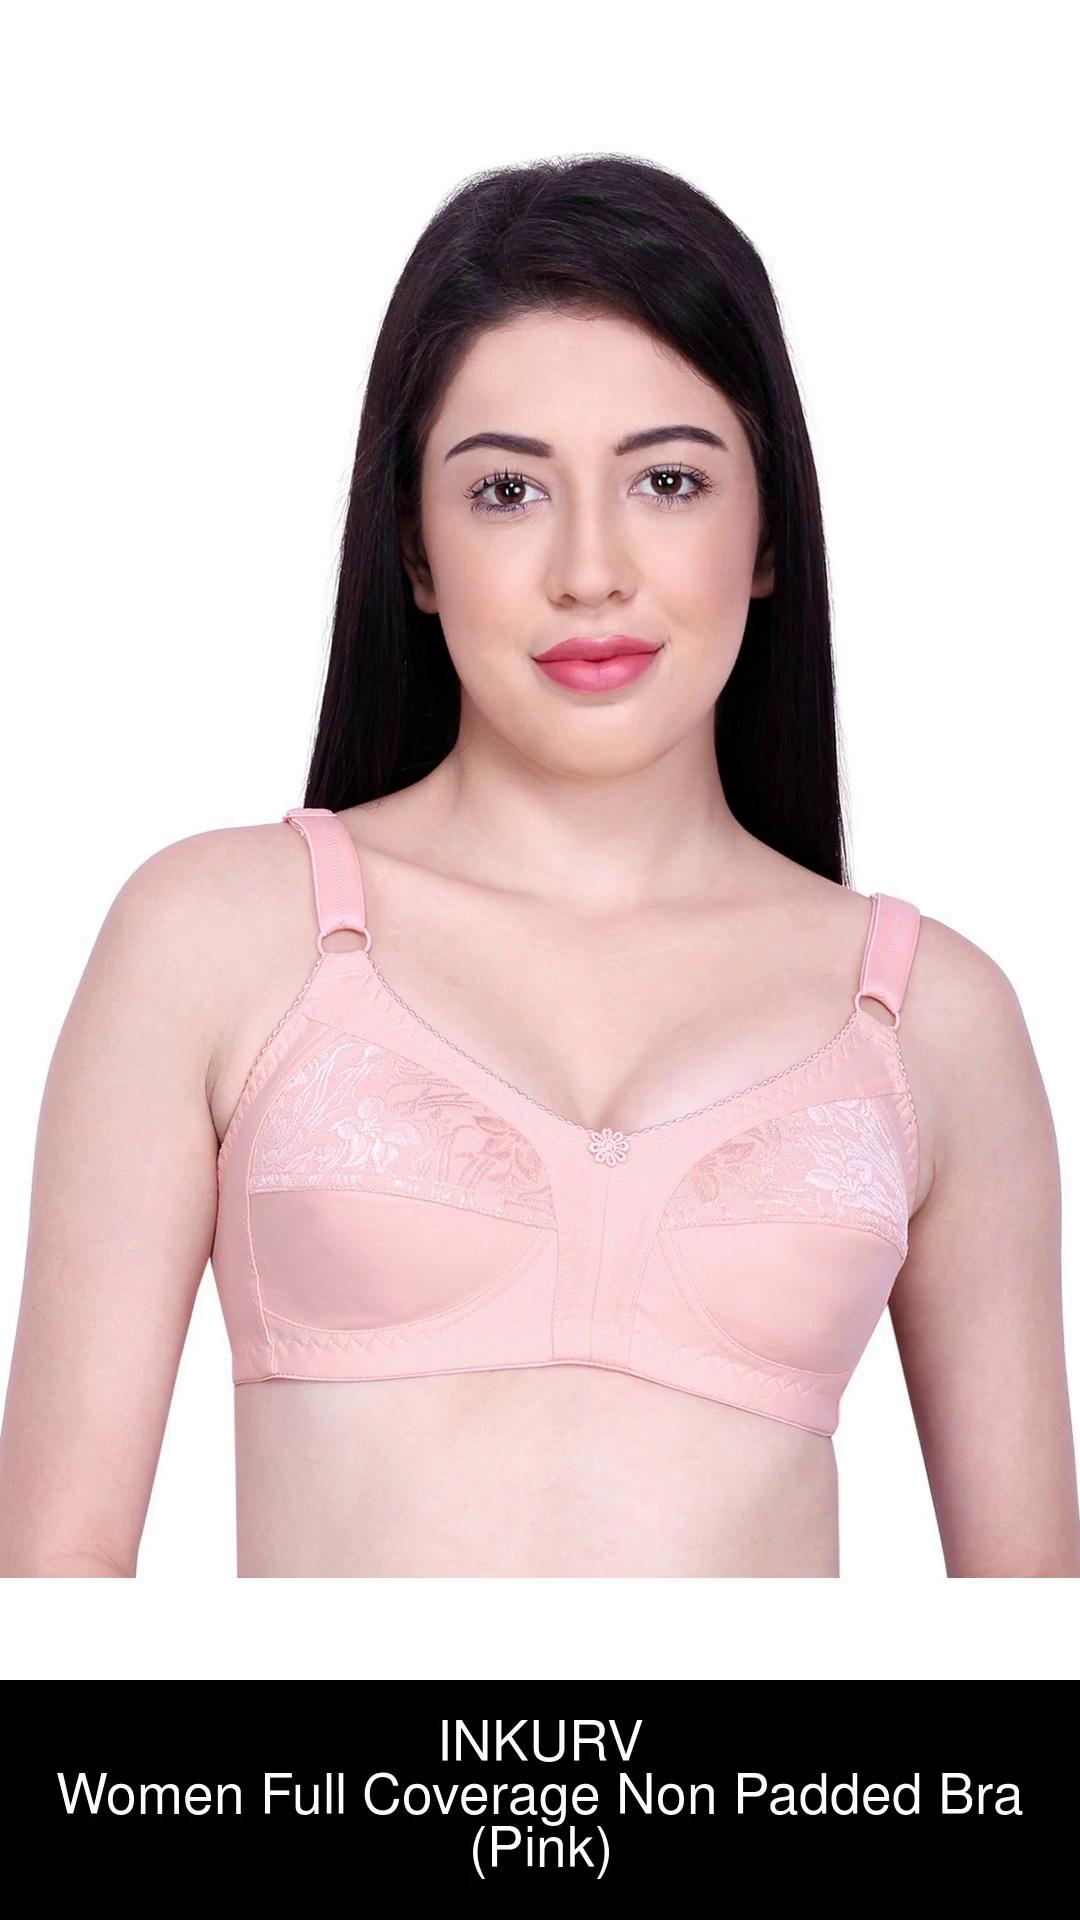 Non-Padded Bras - the difference between Padded & Non-Padded bra? – INKURV